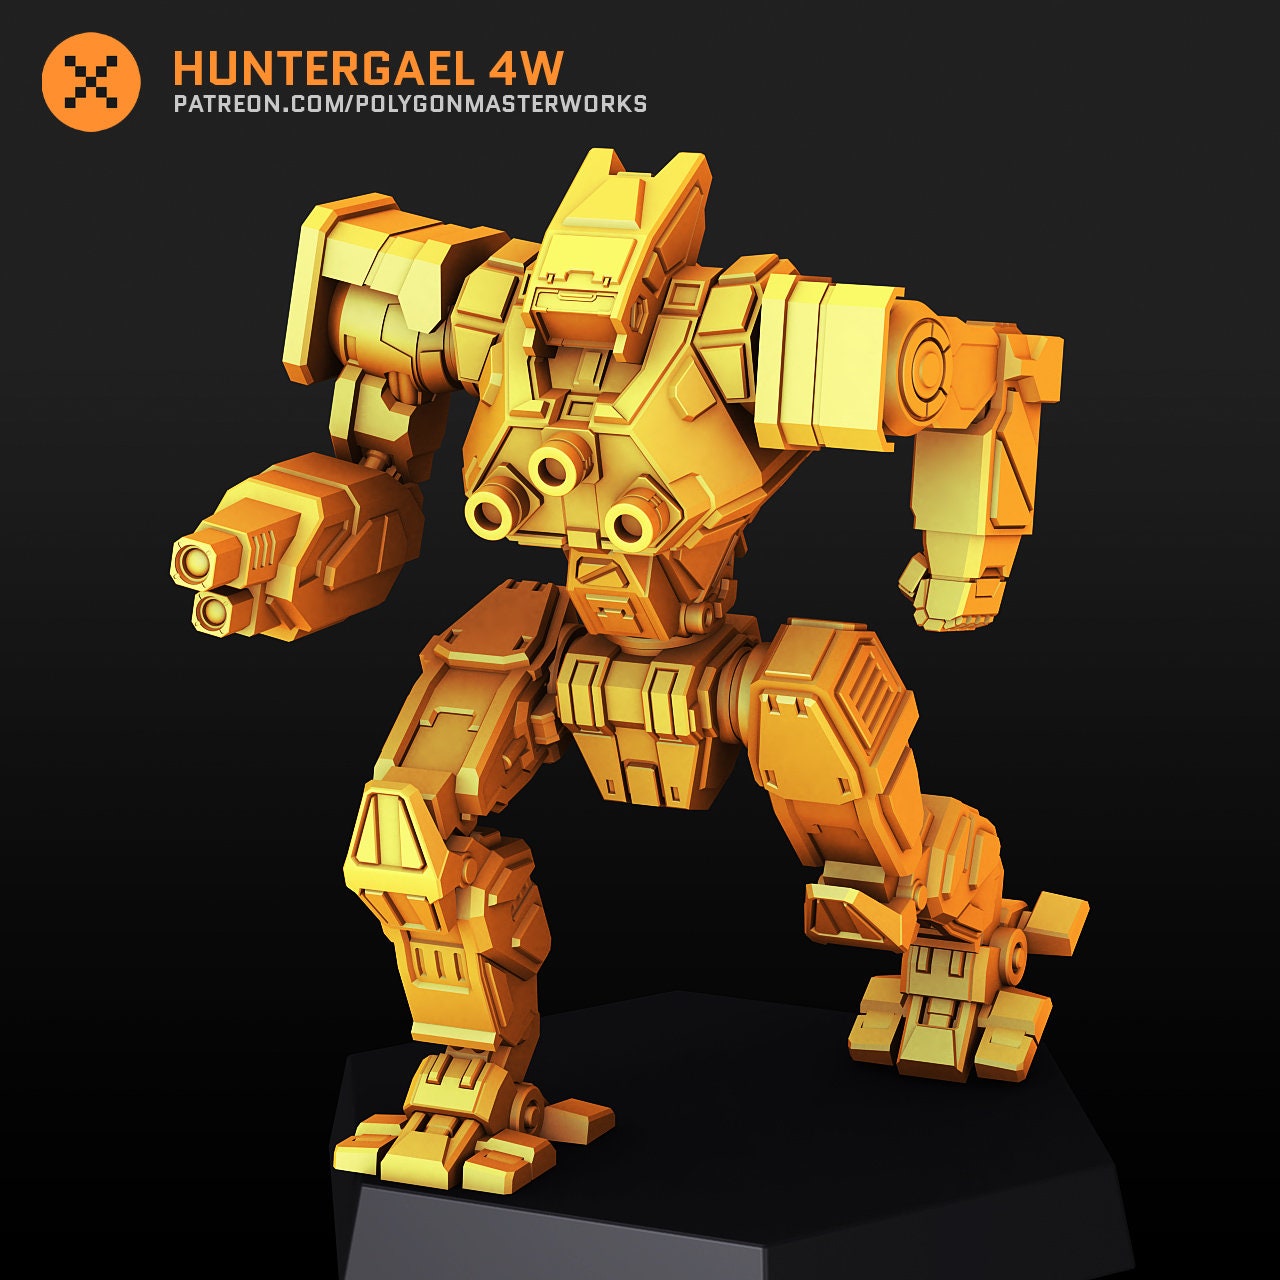 Panther Style Mech for Battletech